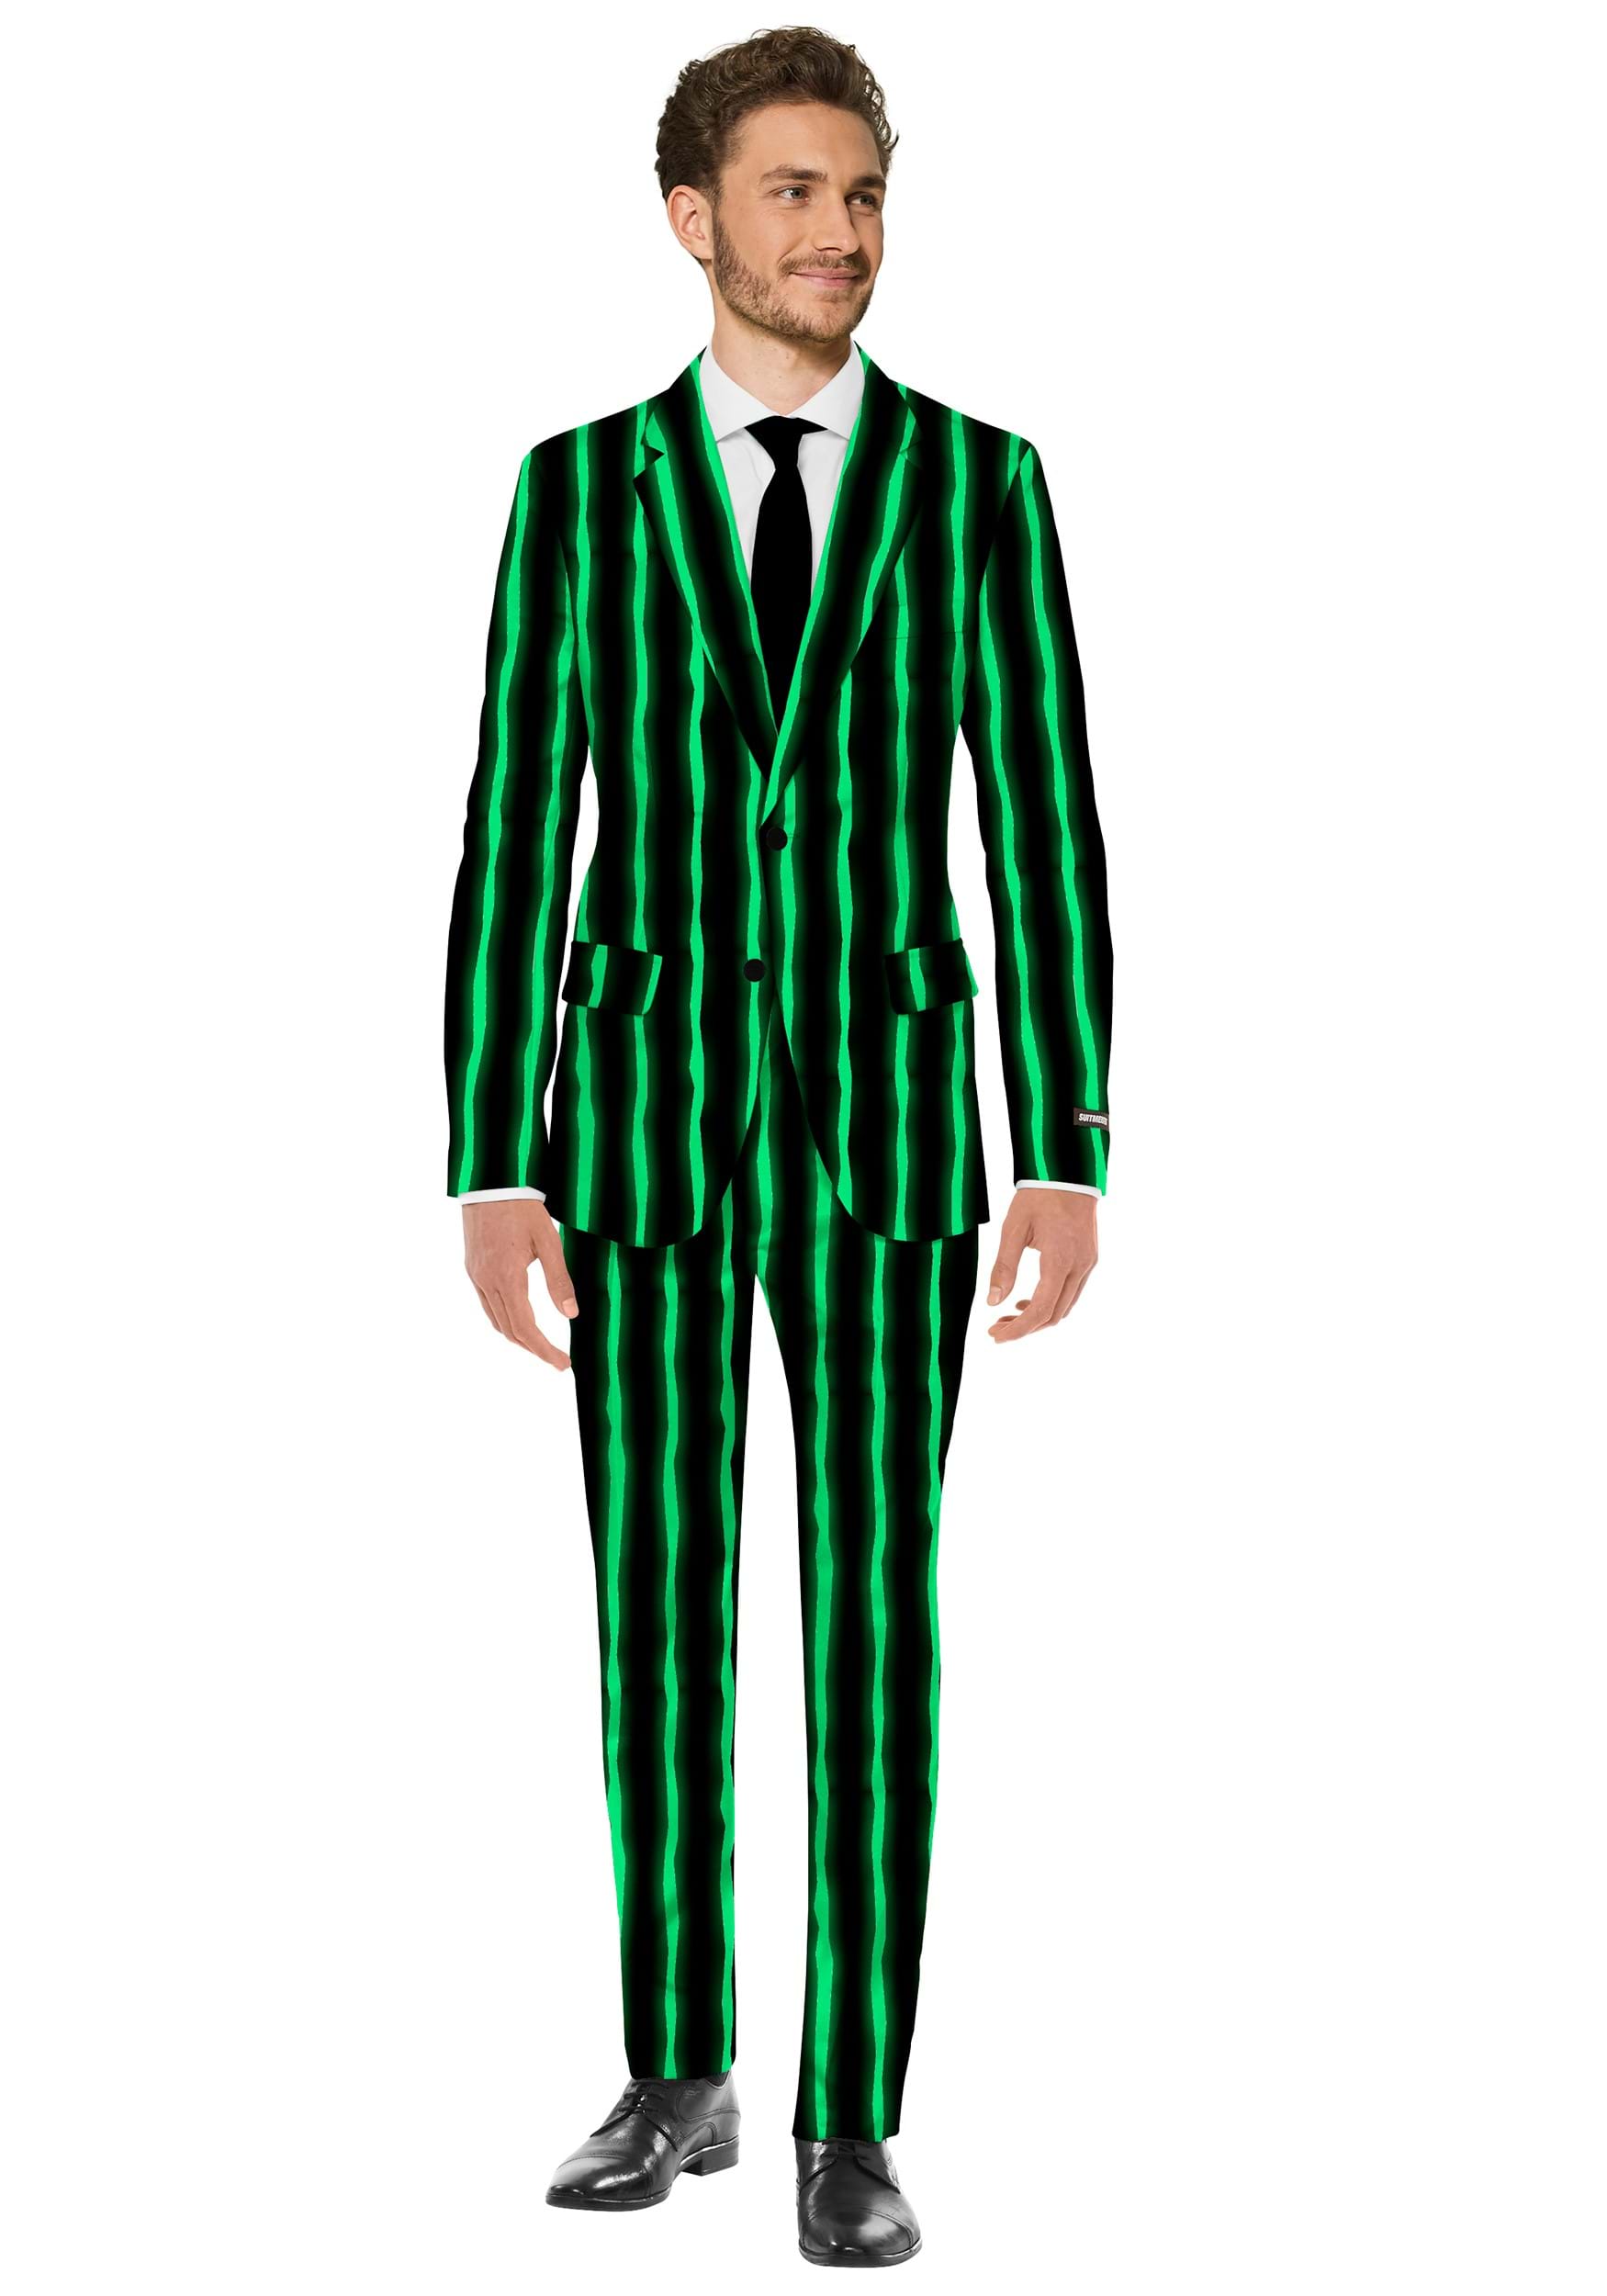 https://images.halloweencostumes.ca/products/74095/1-1/suitmeister-oversized-glow-in-the-dark-pinstripe-black-suit.jpg